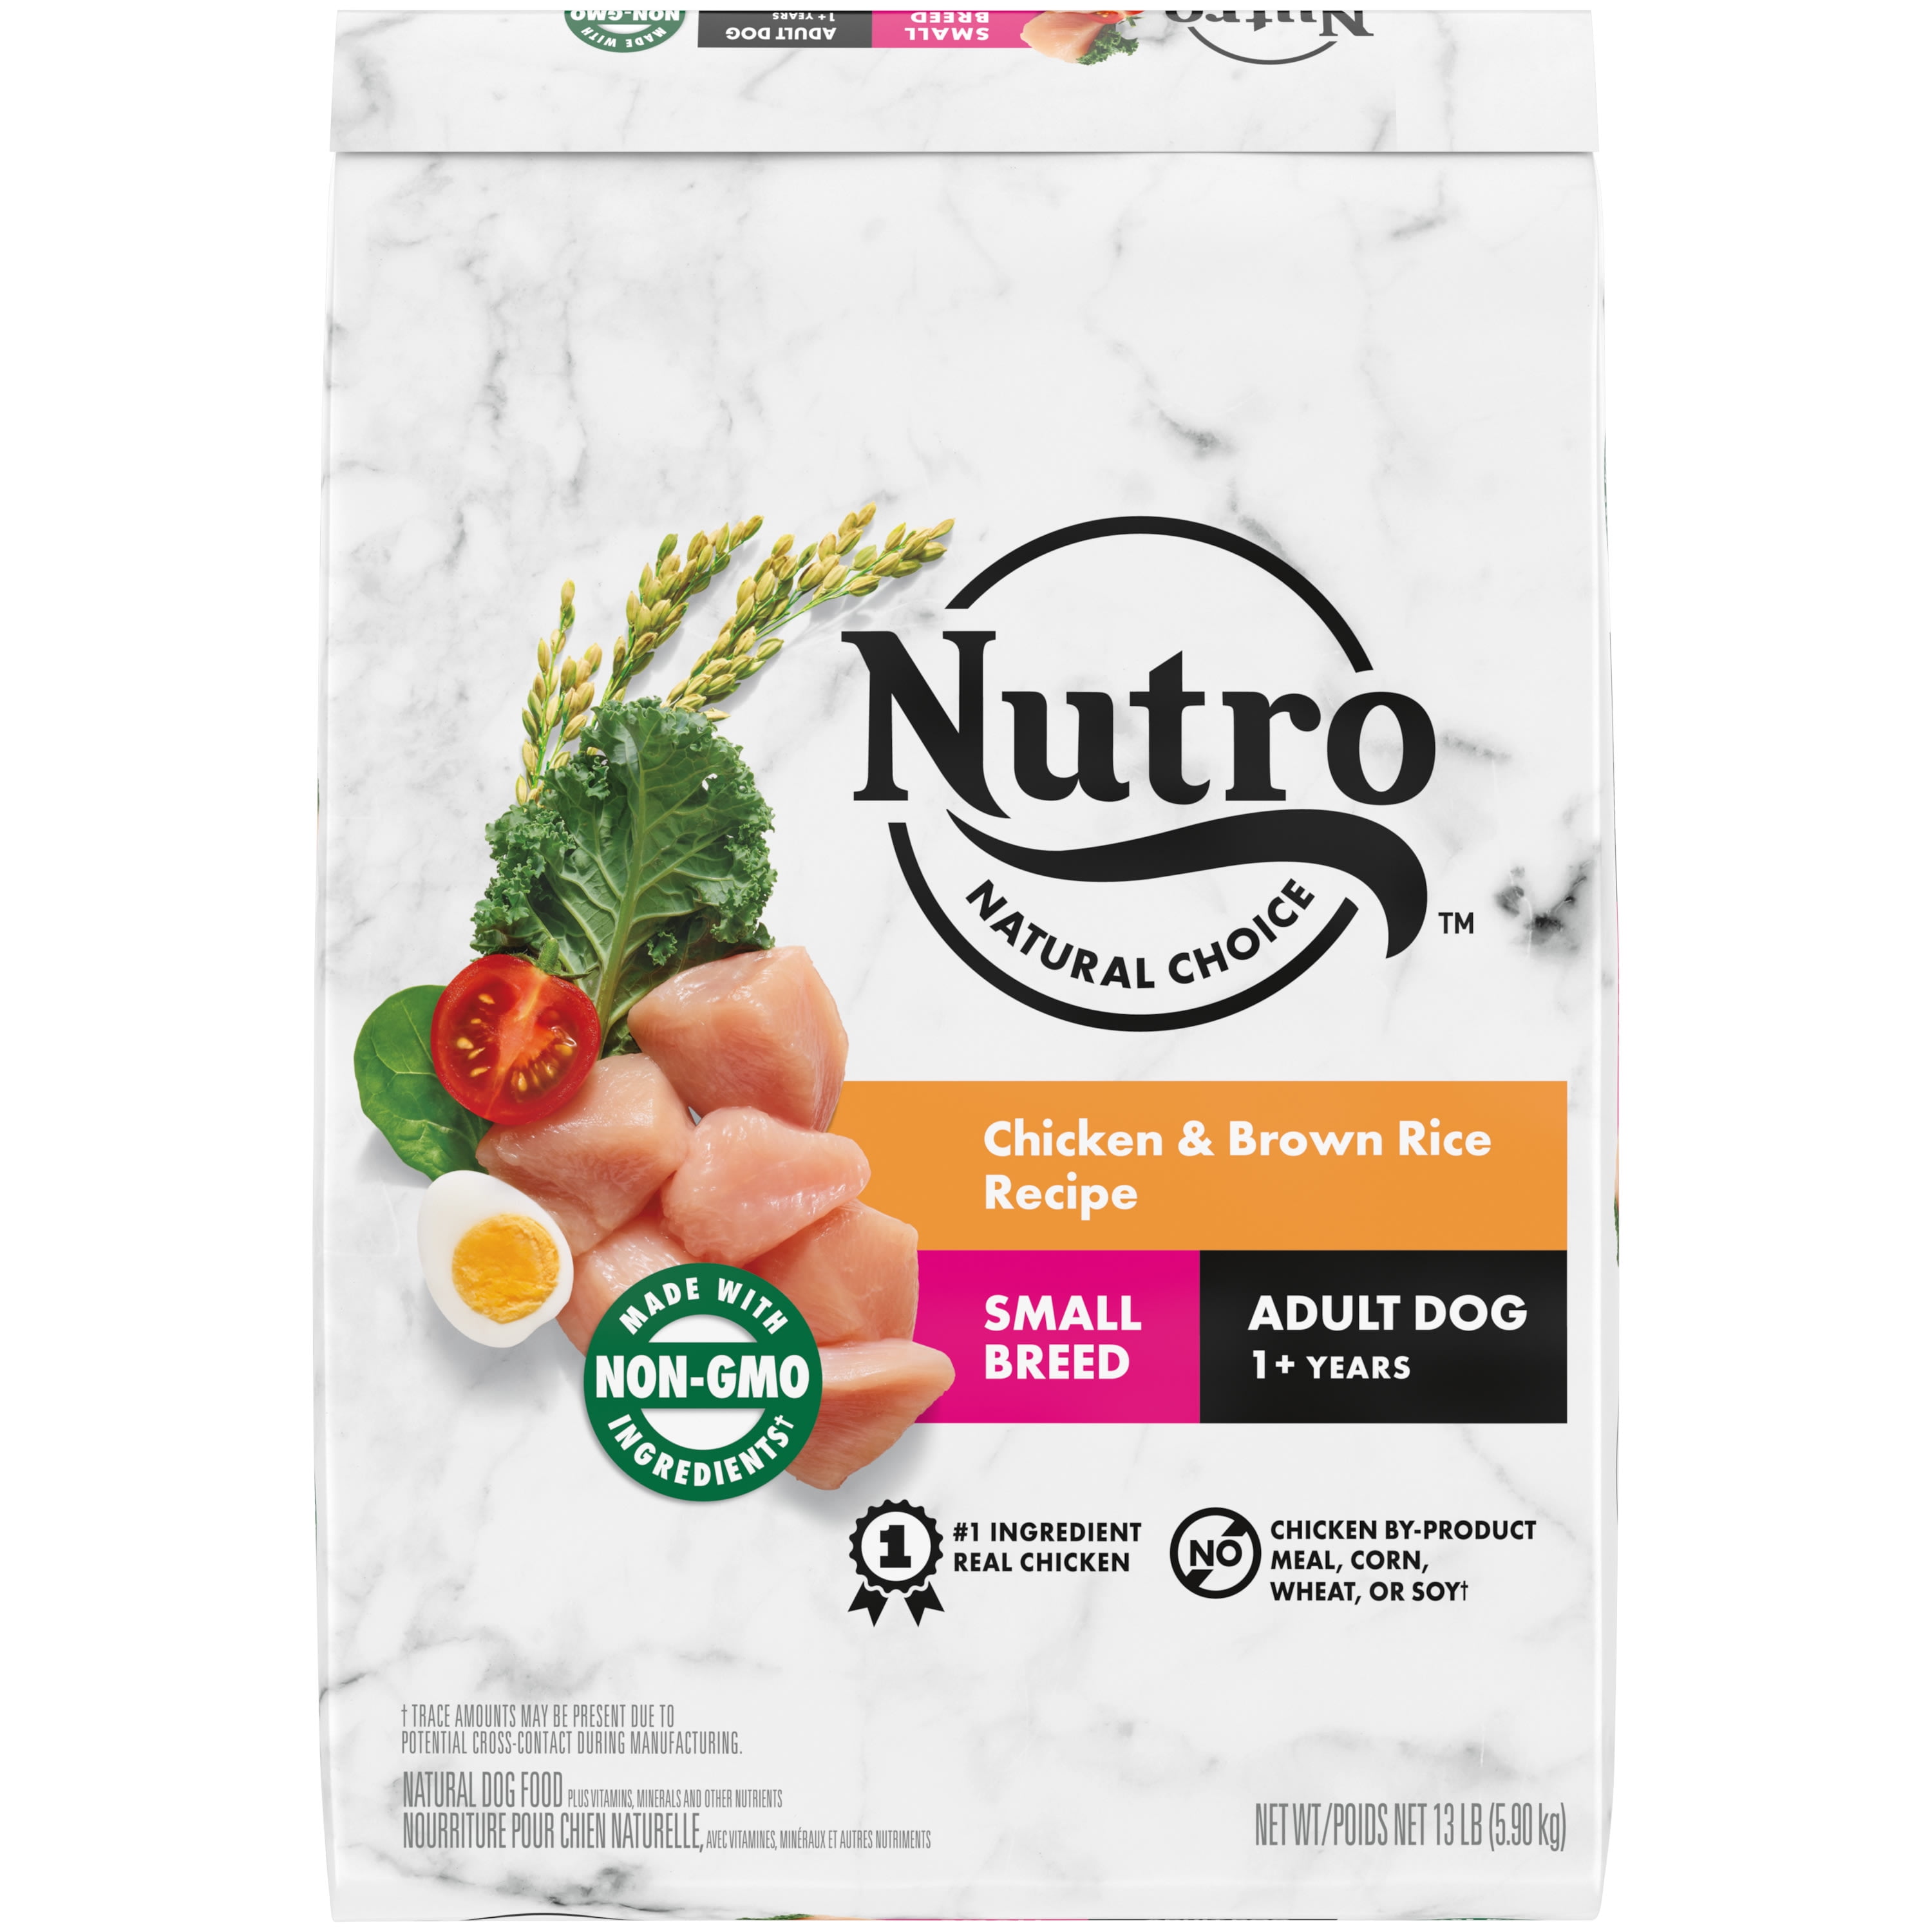 NUTRO NATURAL CHOICE Chicken & Brown Rice Flavor Dry Dog Food for Small Breed Adult Dog, 13 lb. Bag